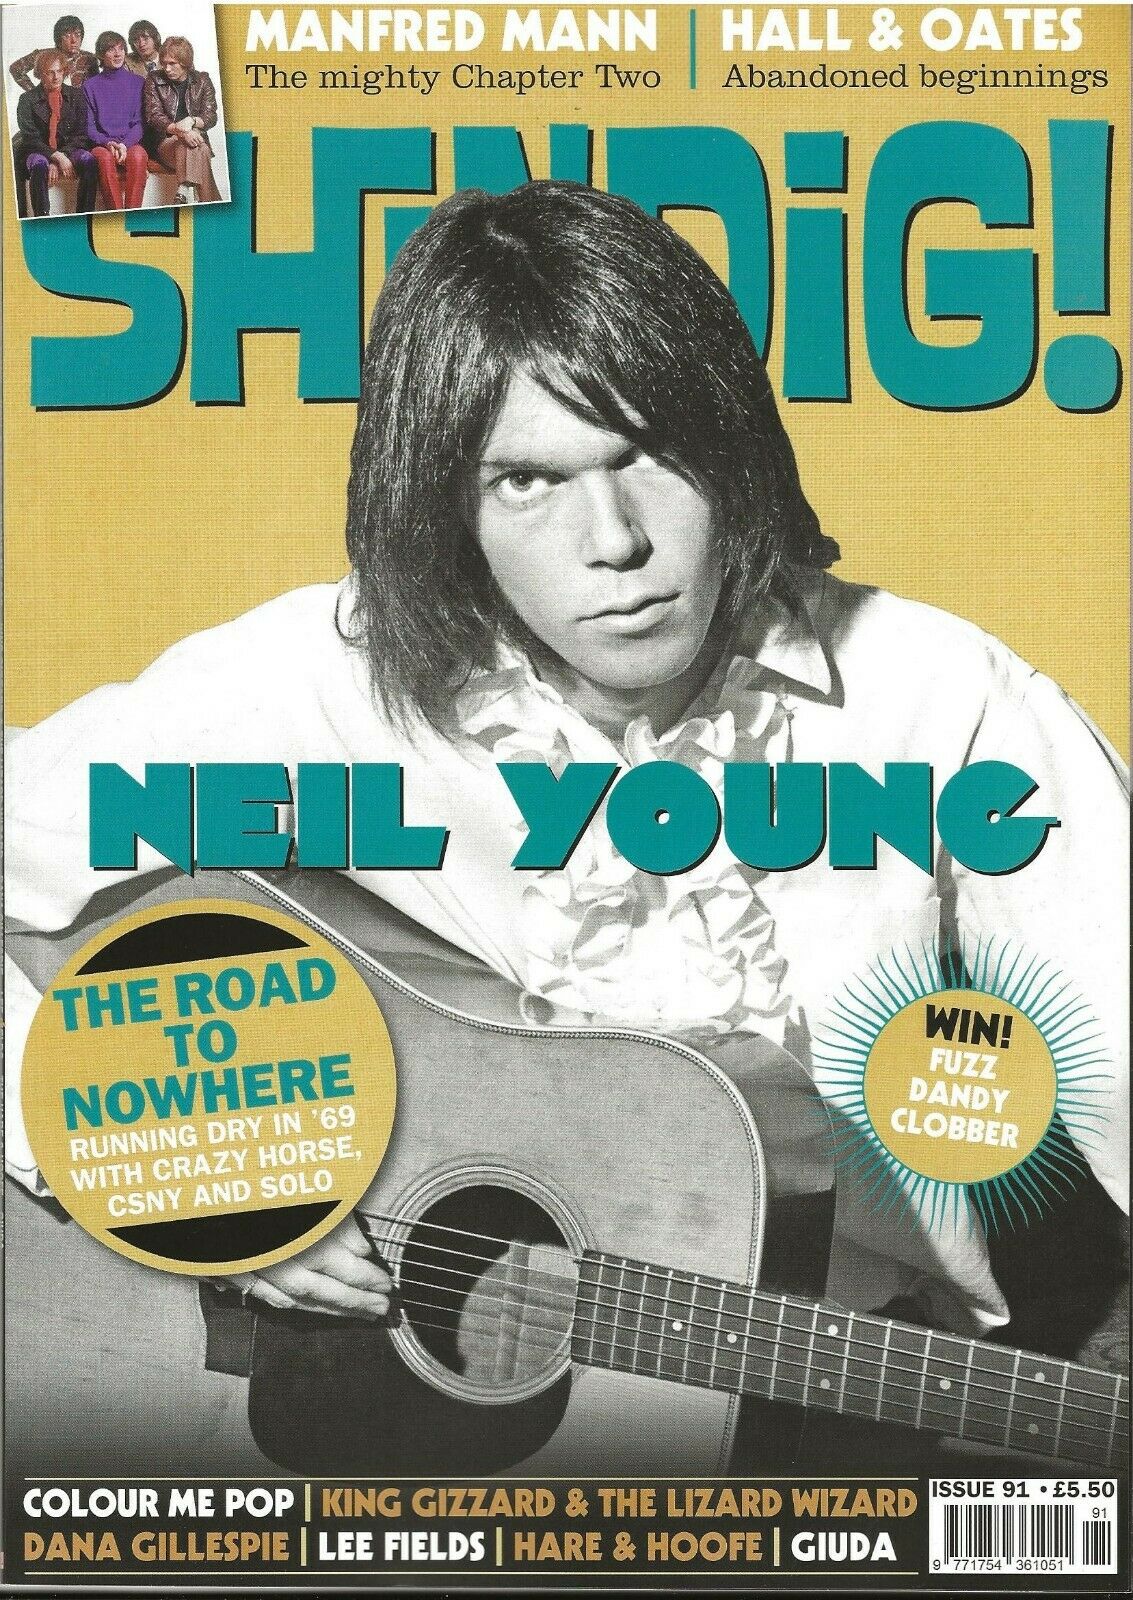 SHINDIG! ISSUE #91 MAY 2019 NEIL YOUNG MANFRED MANN HALL & OATES UK